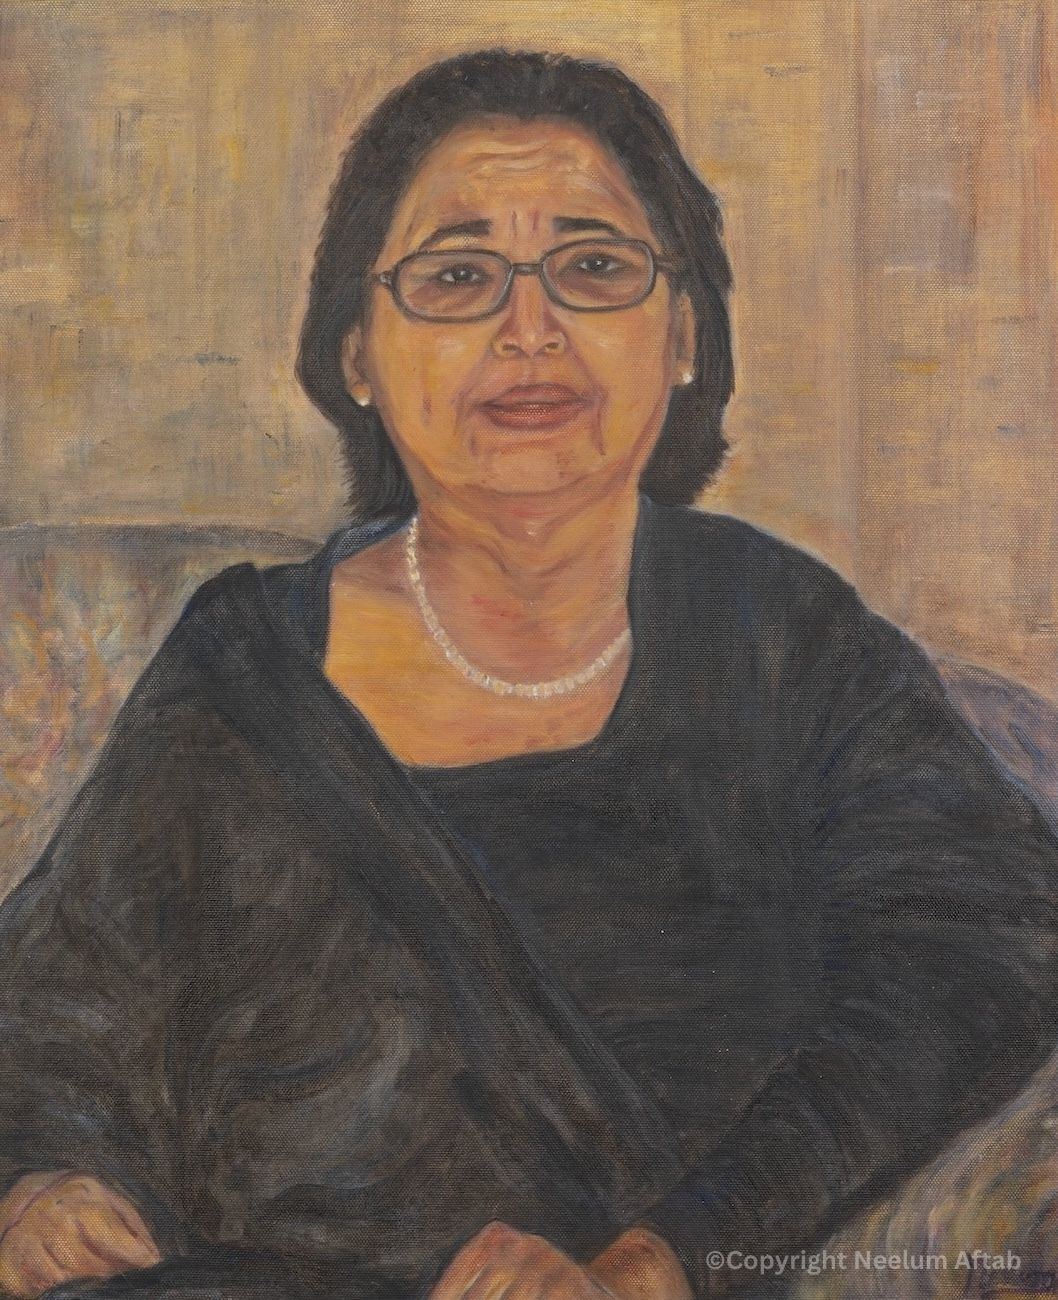 Neelum Aftab is a fine artist, and her practice has portrayed the concept of third space relating to diaspora of South Asian communities. It shows various facets of cultural transformation, assimilation and cultural hybridisation.